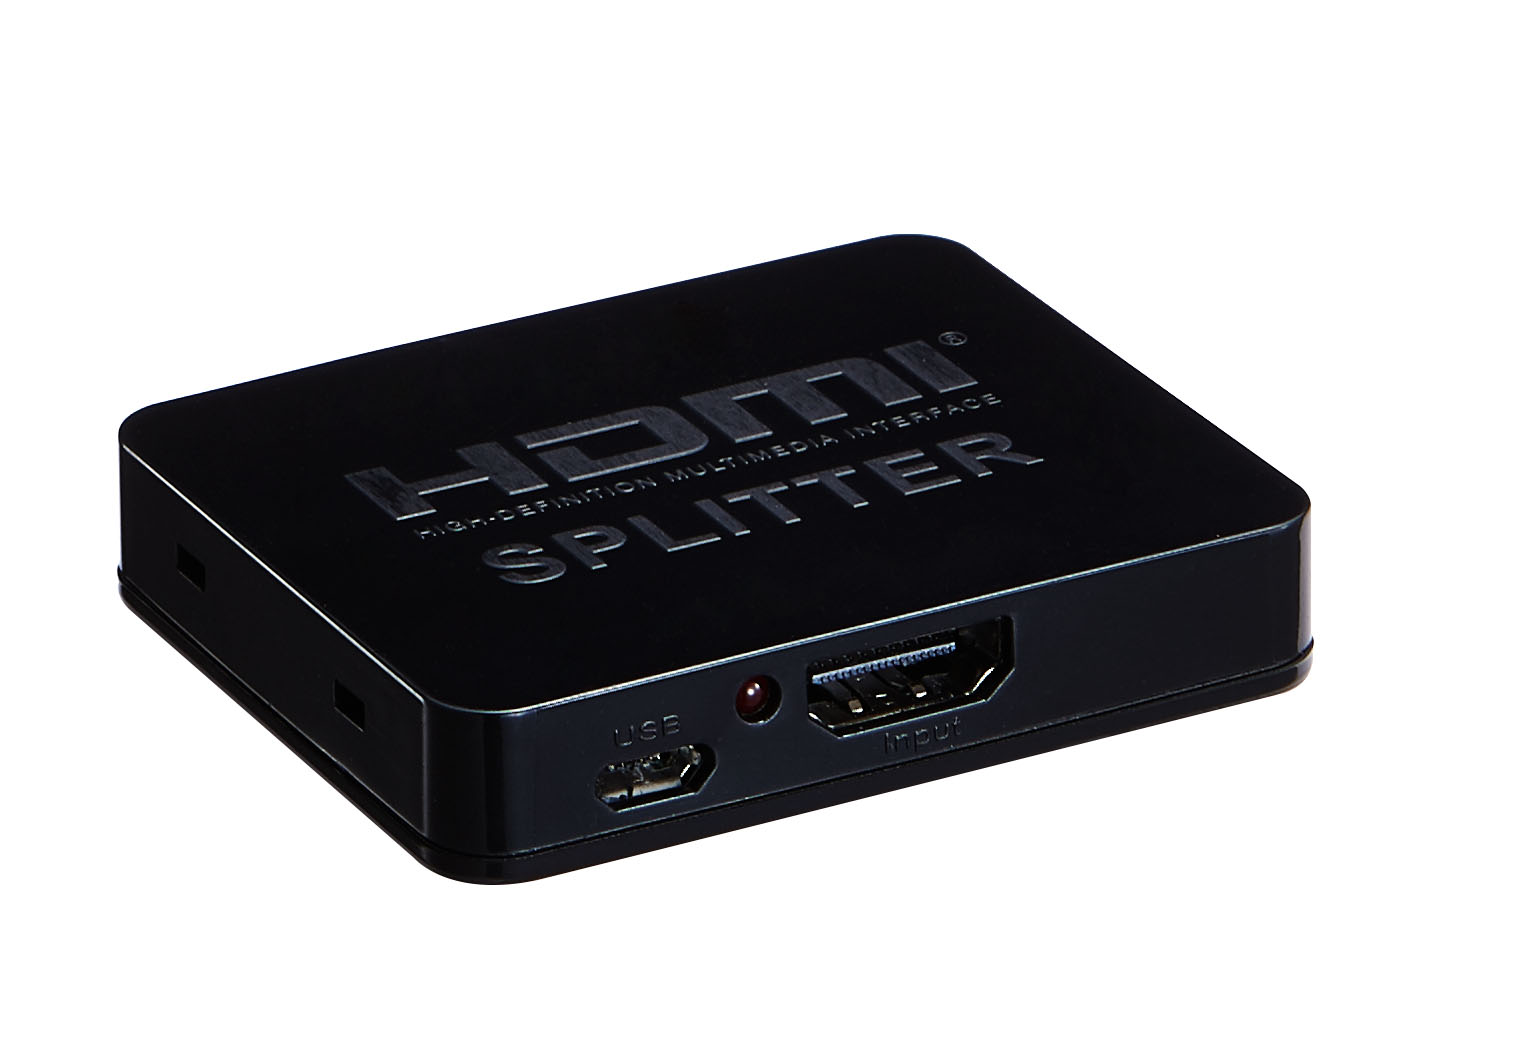 LU602H: 2 Ports HDMI 1.4 Splitter Repeater Amplifier 1 in 2 out with Full 1080P 3D and 4Kx2K